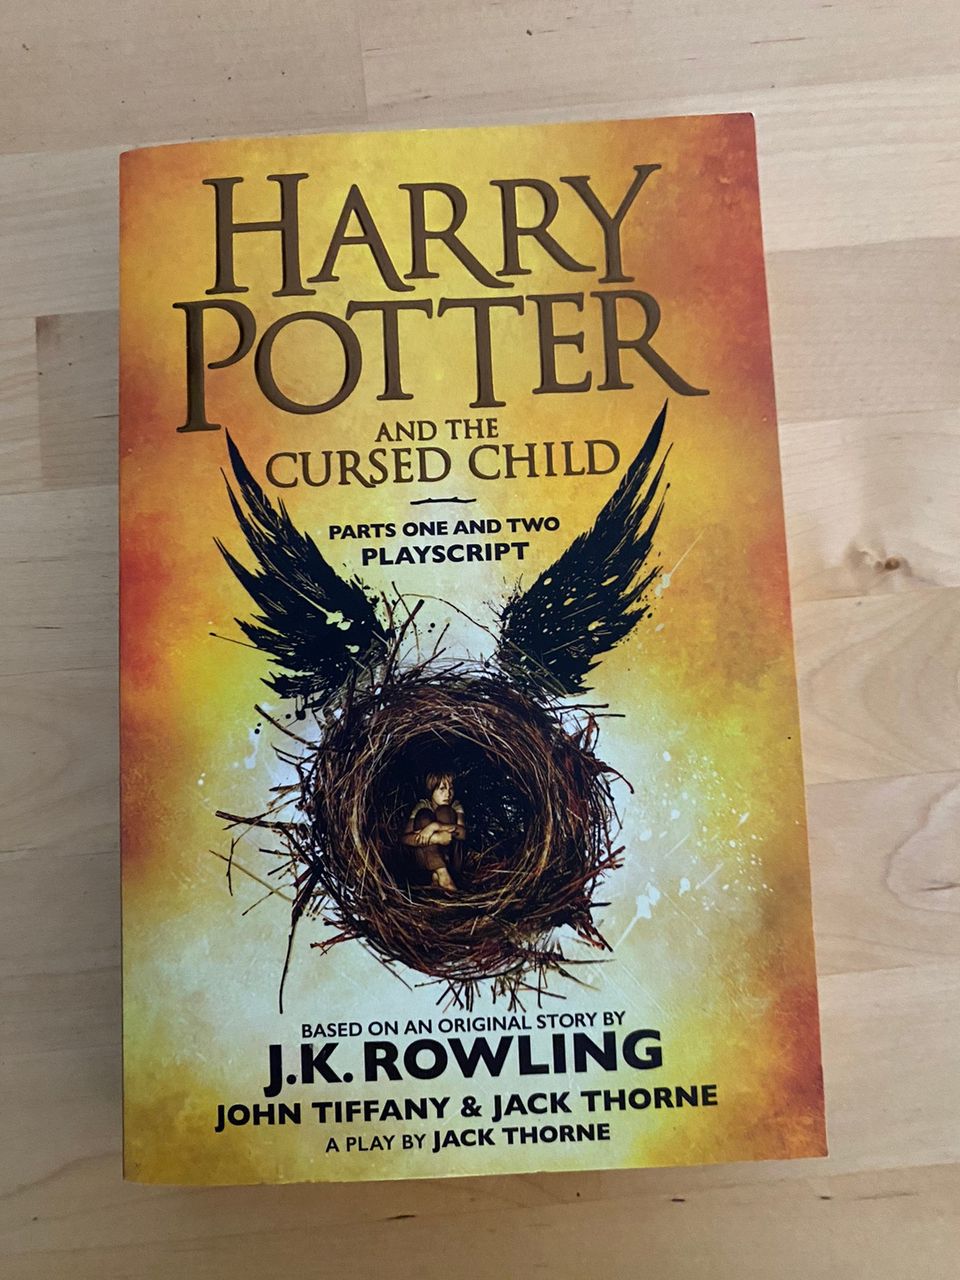 J.K Rowling - Harry Potter and the cursed child